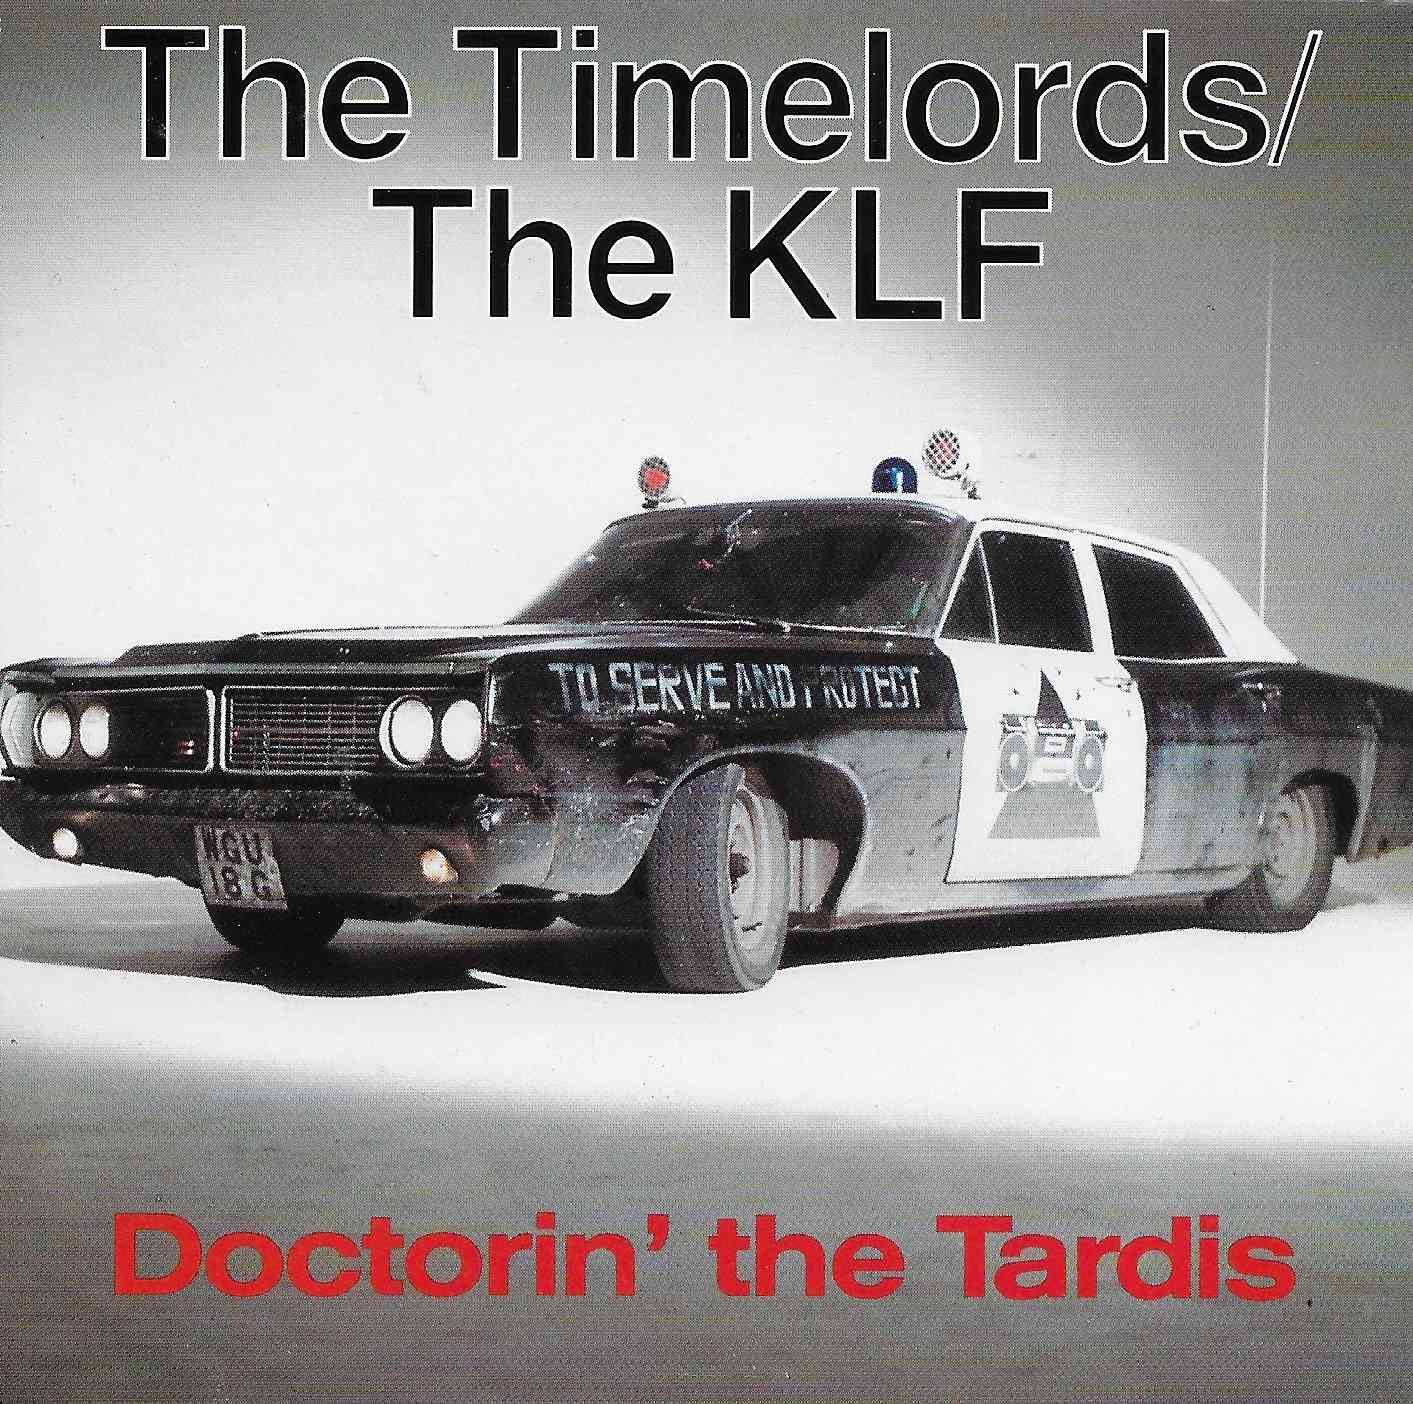 Picture of Doctorin' the Tardis by artist Ron Grainer / The Timelords / KLF from the BBC cdsingles - Records and Tapes library